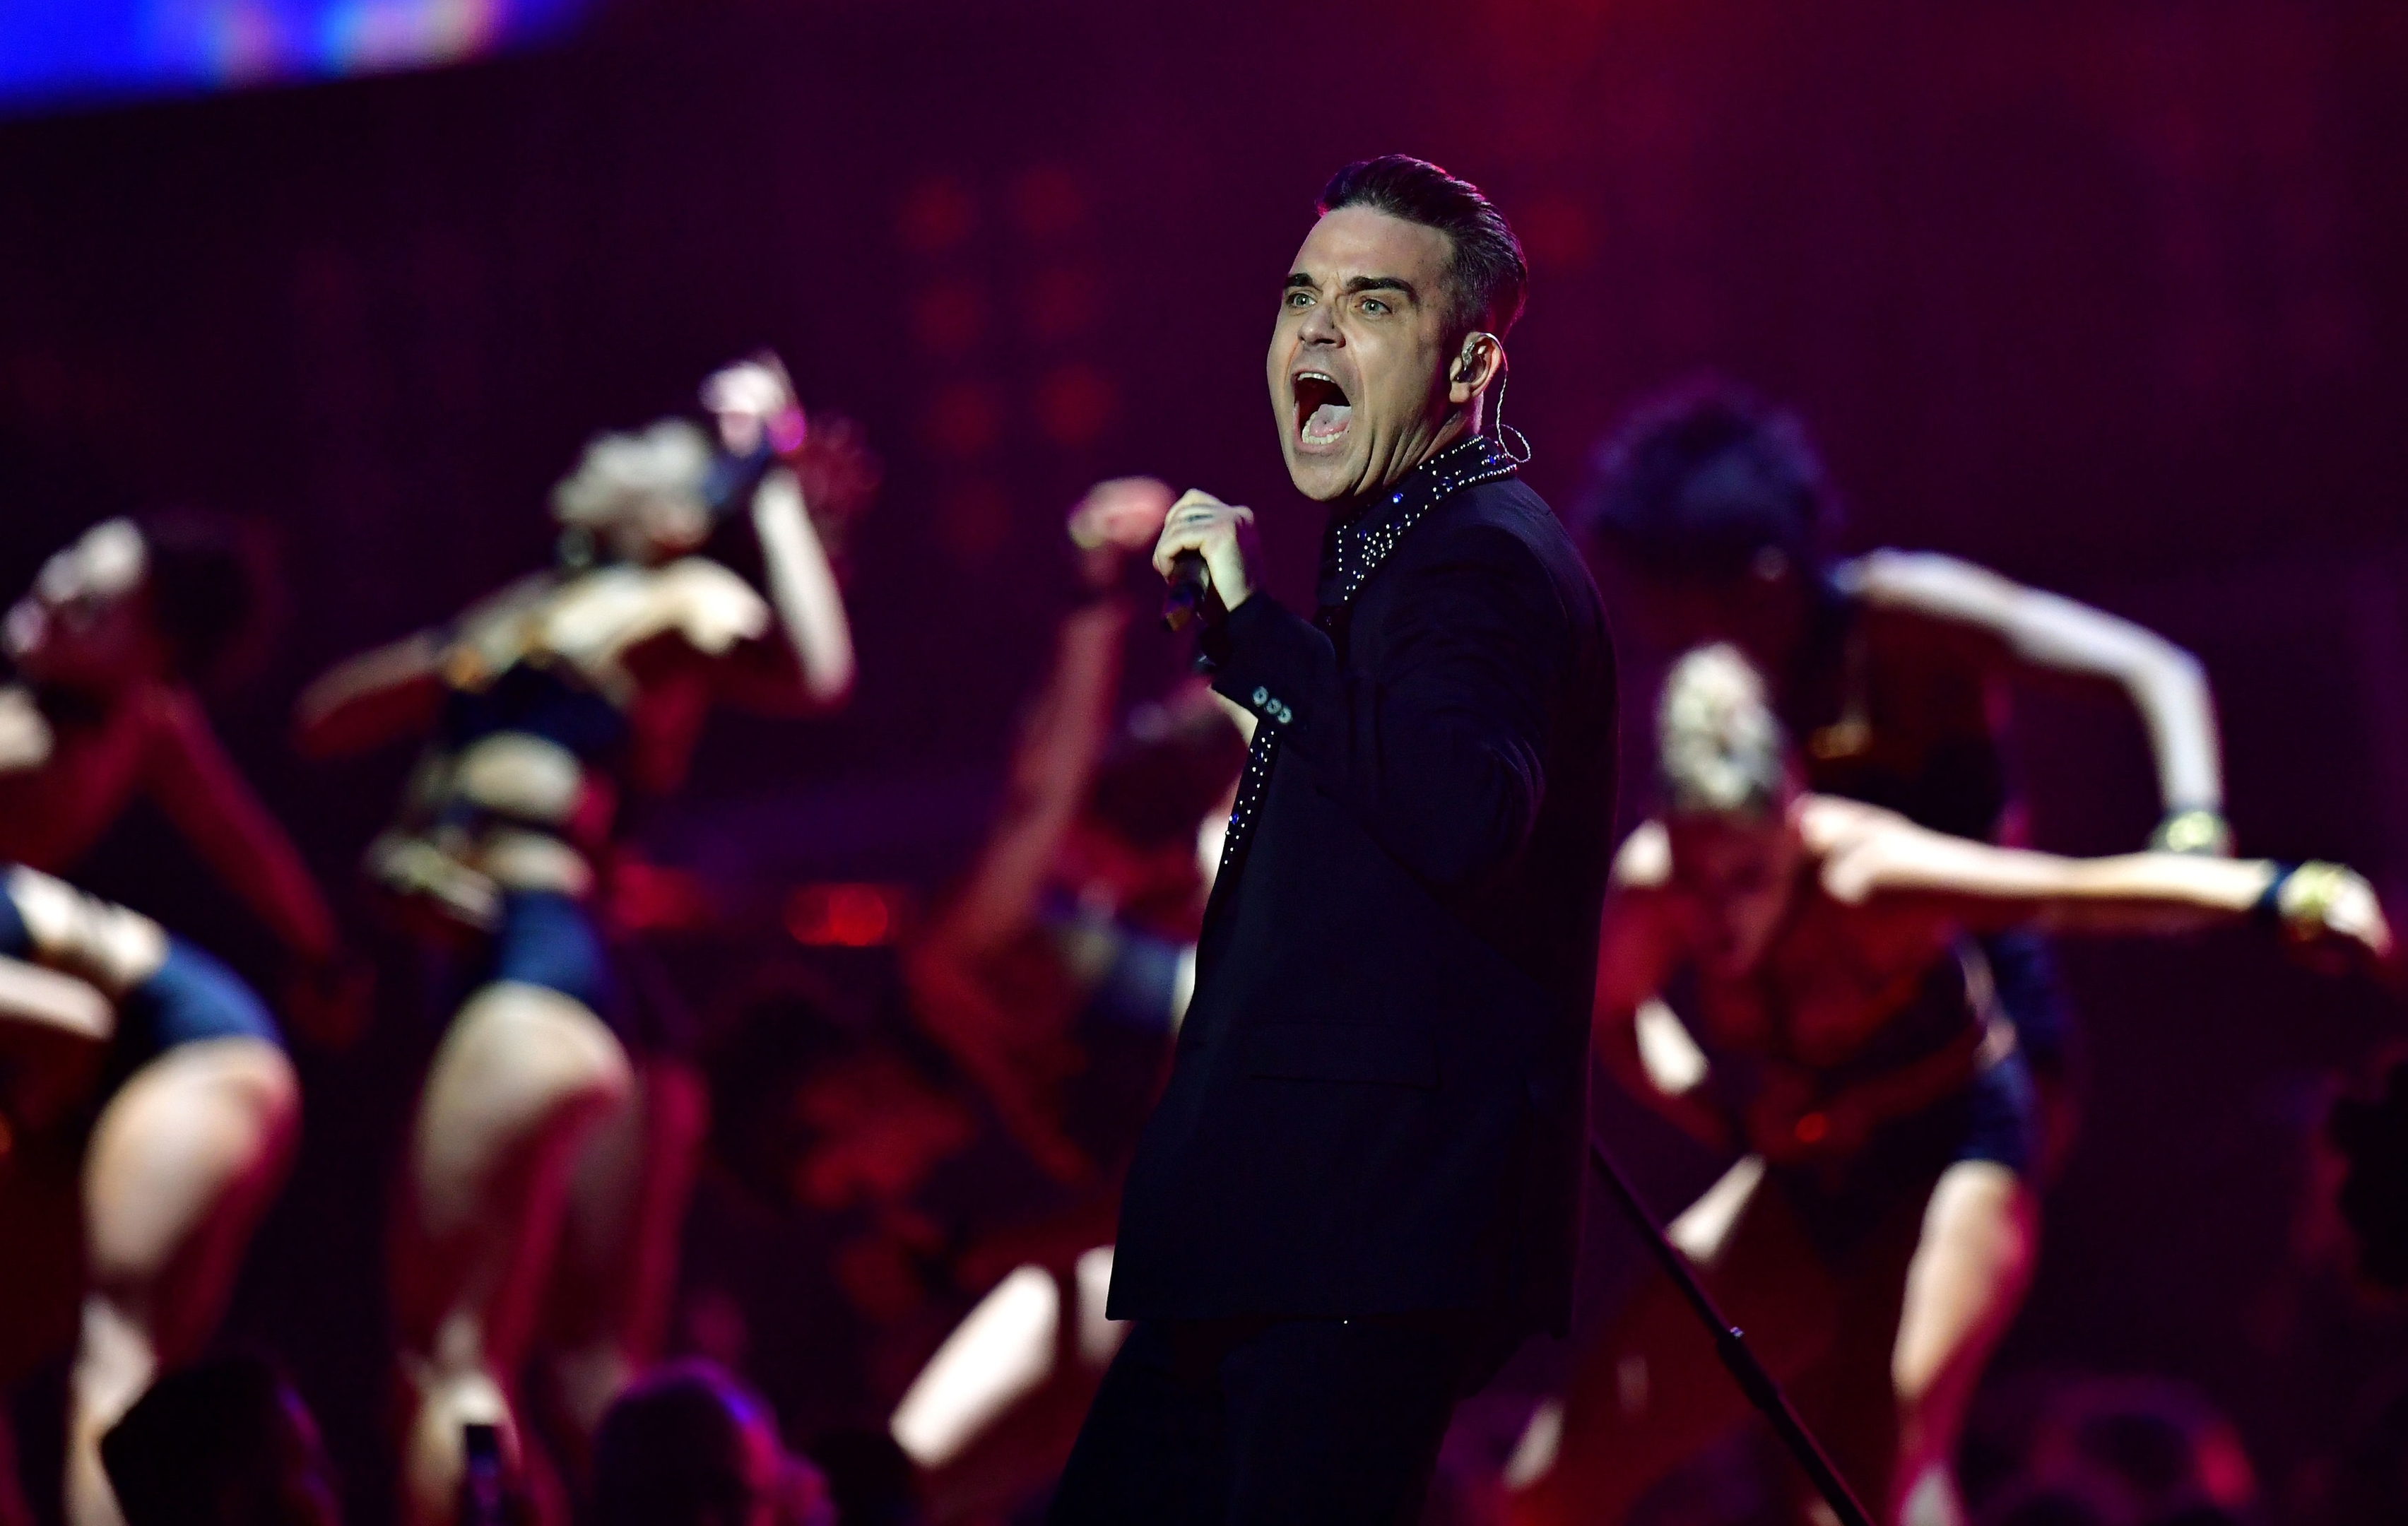 Robbie Williams performs on stage at the Brit Awards at the O2 Arena